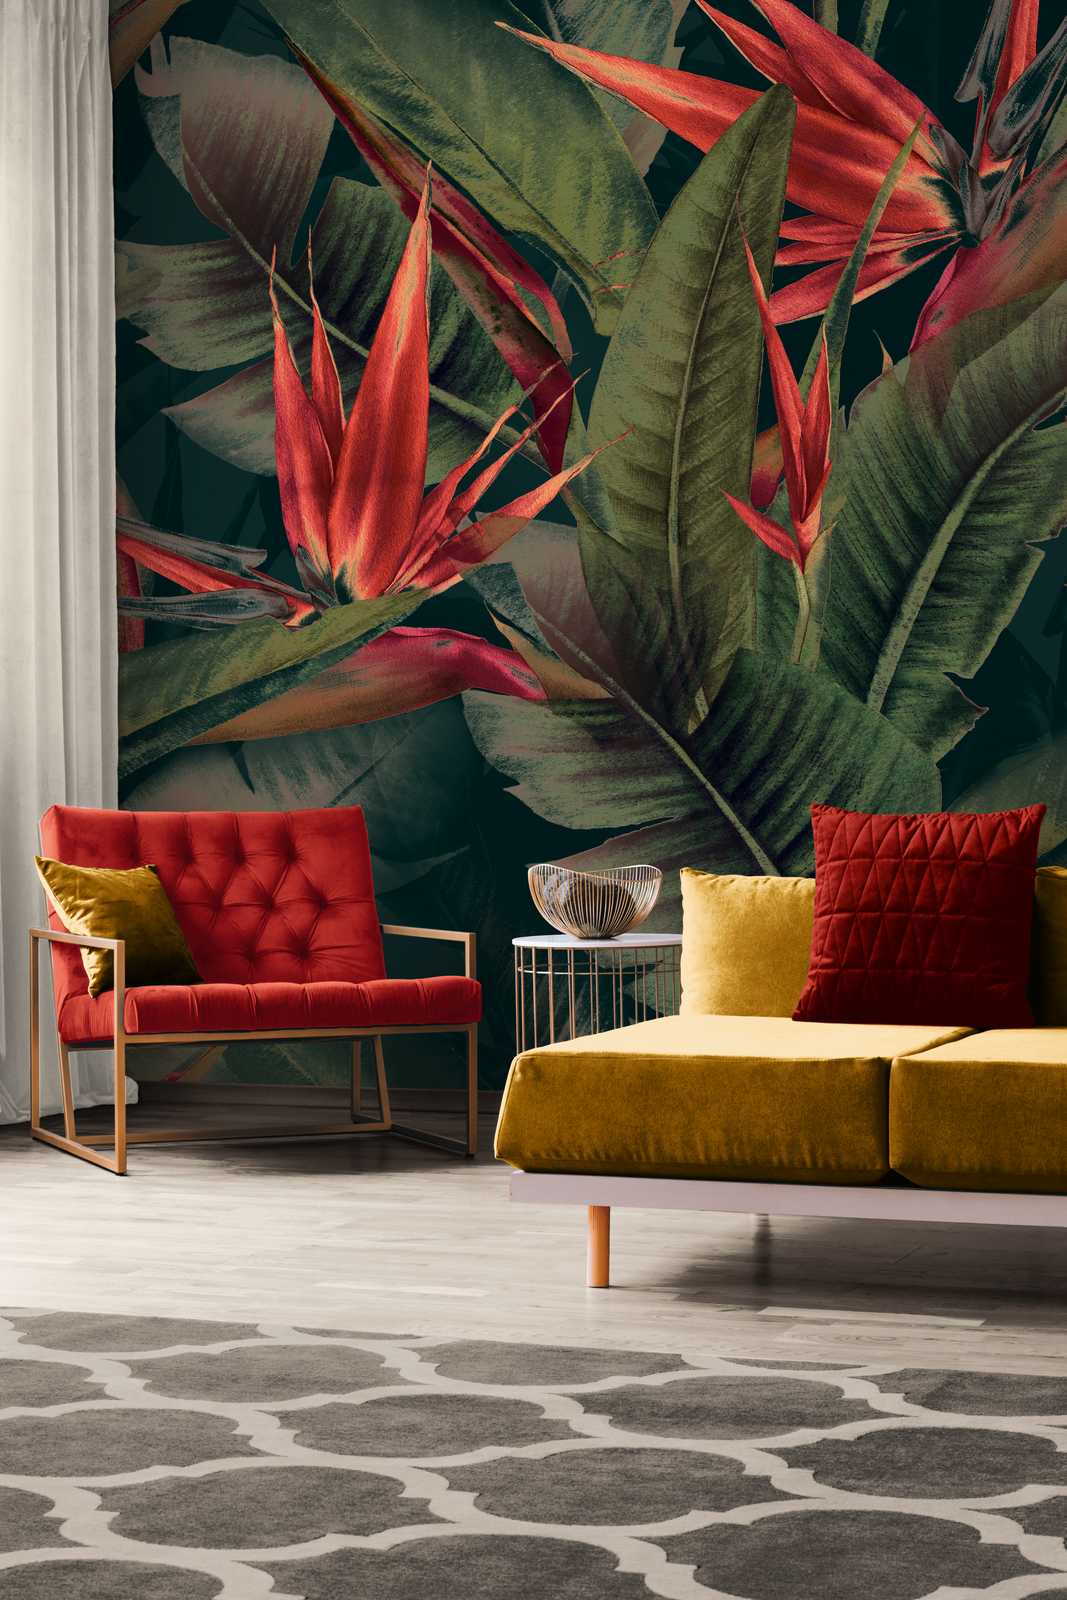             Jungle mural green with red bird of paradise flowers
        